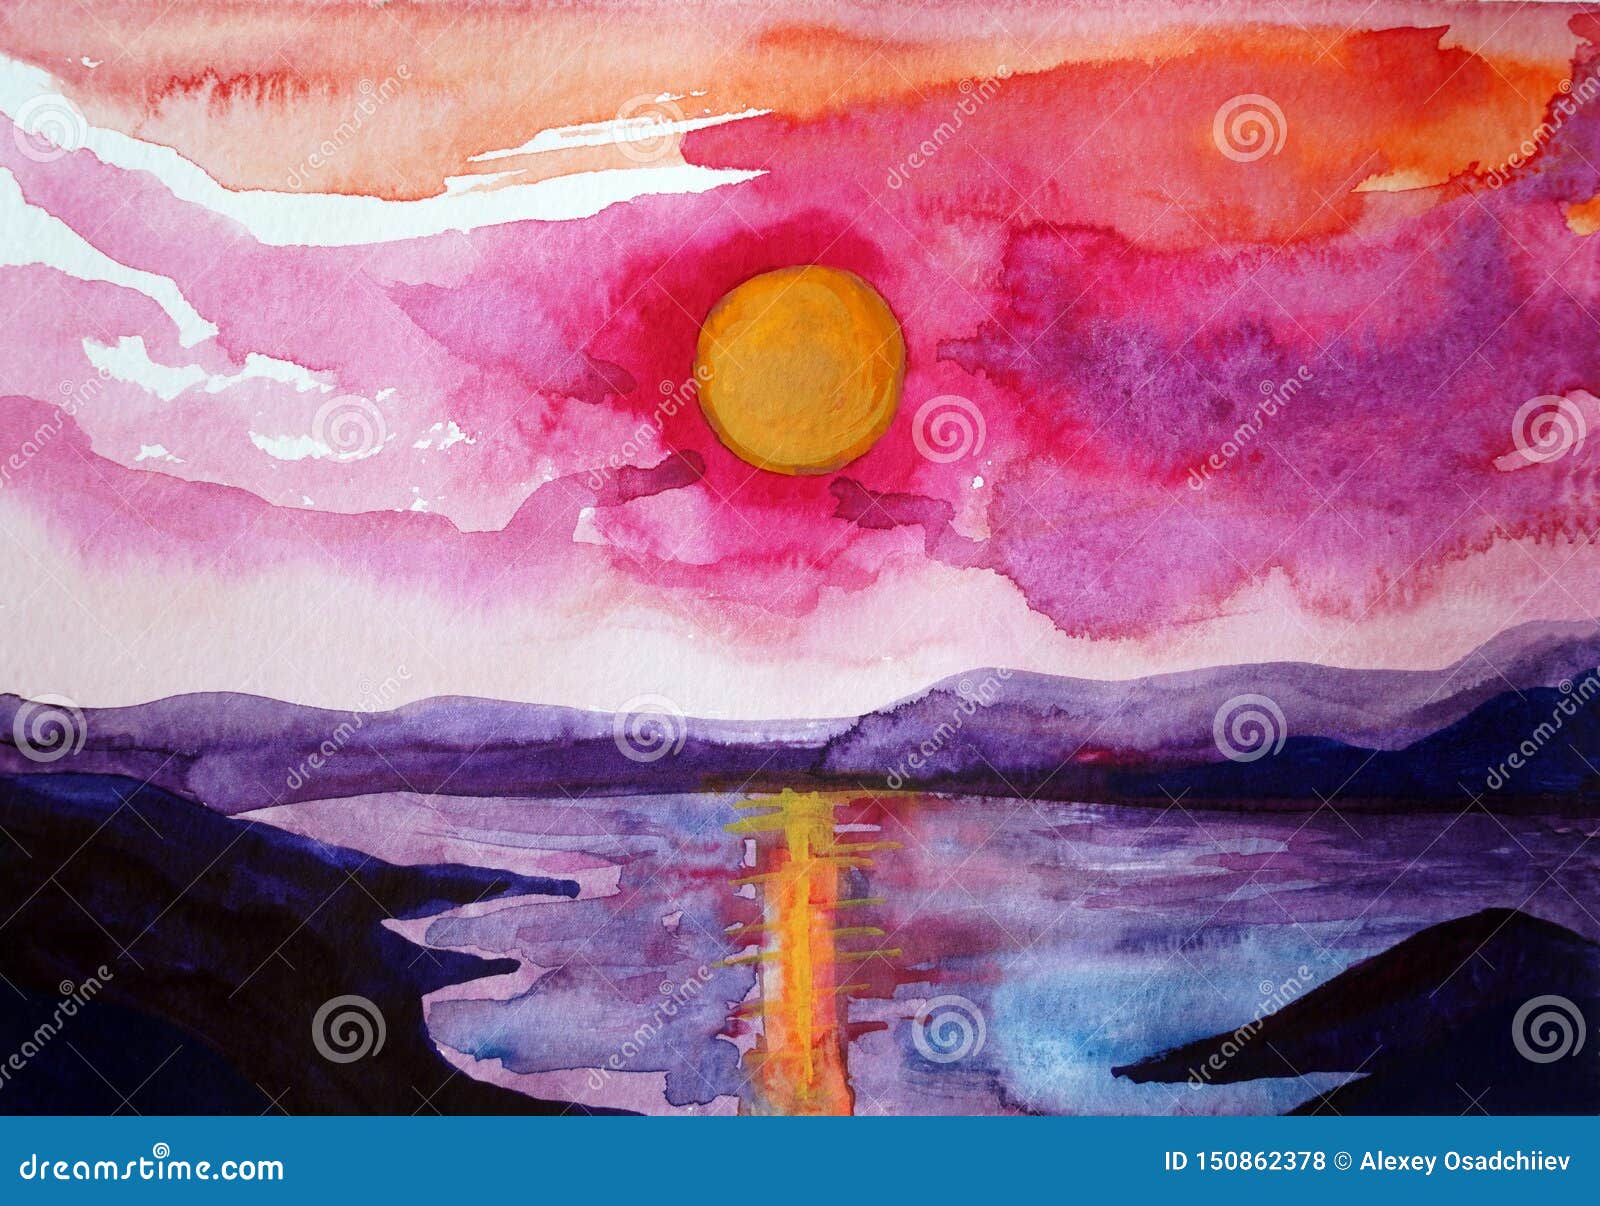 Drawing Of Bright Sunset Sunrise Over The Sea Stock Photo Image